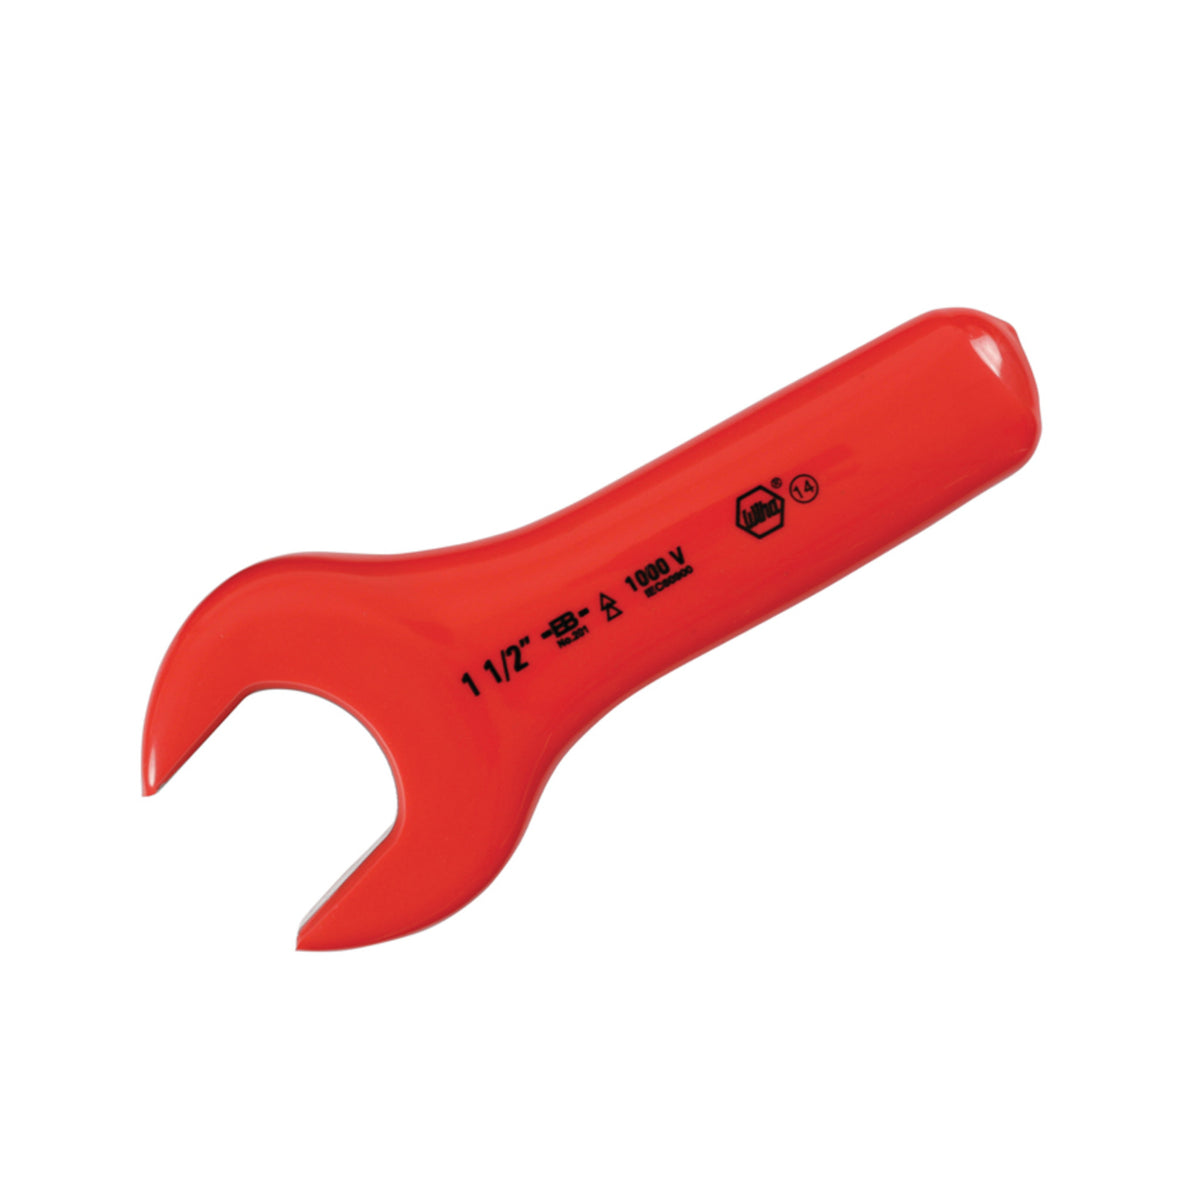 Insulated Open End Wrenches